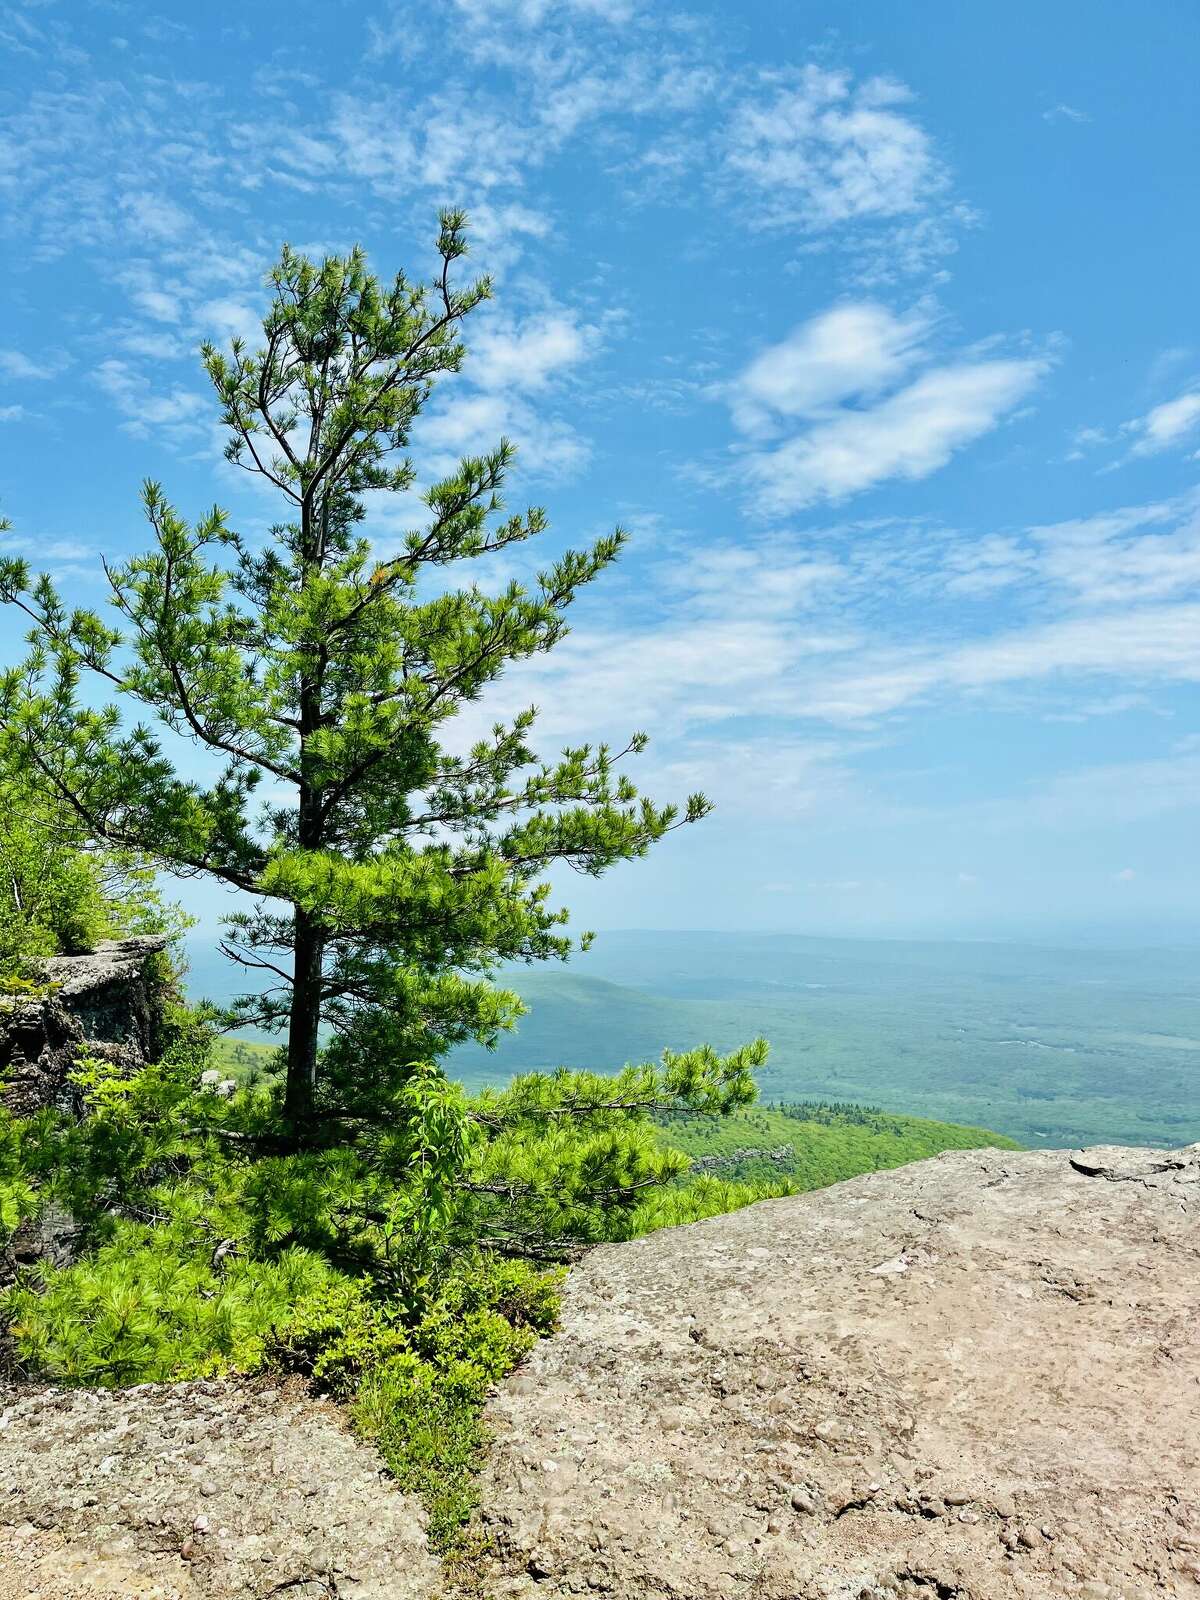 The Escarpment Trail winds along the side of several mountains, offering many glorious views of the Hudson Valley.